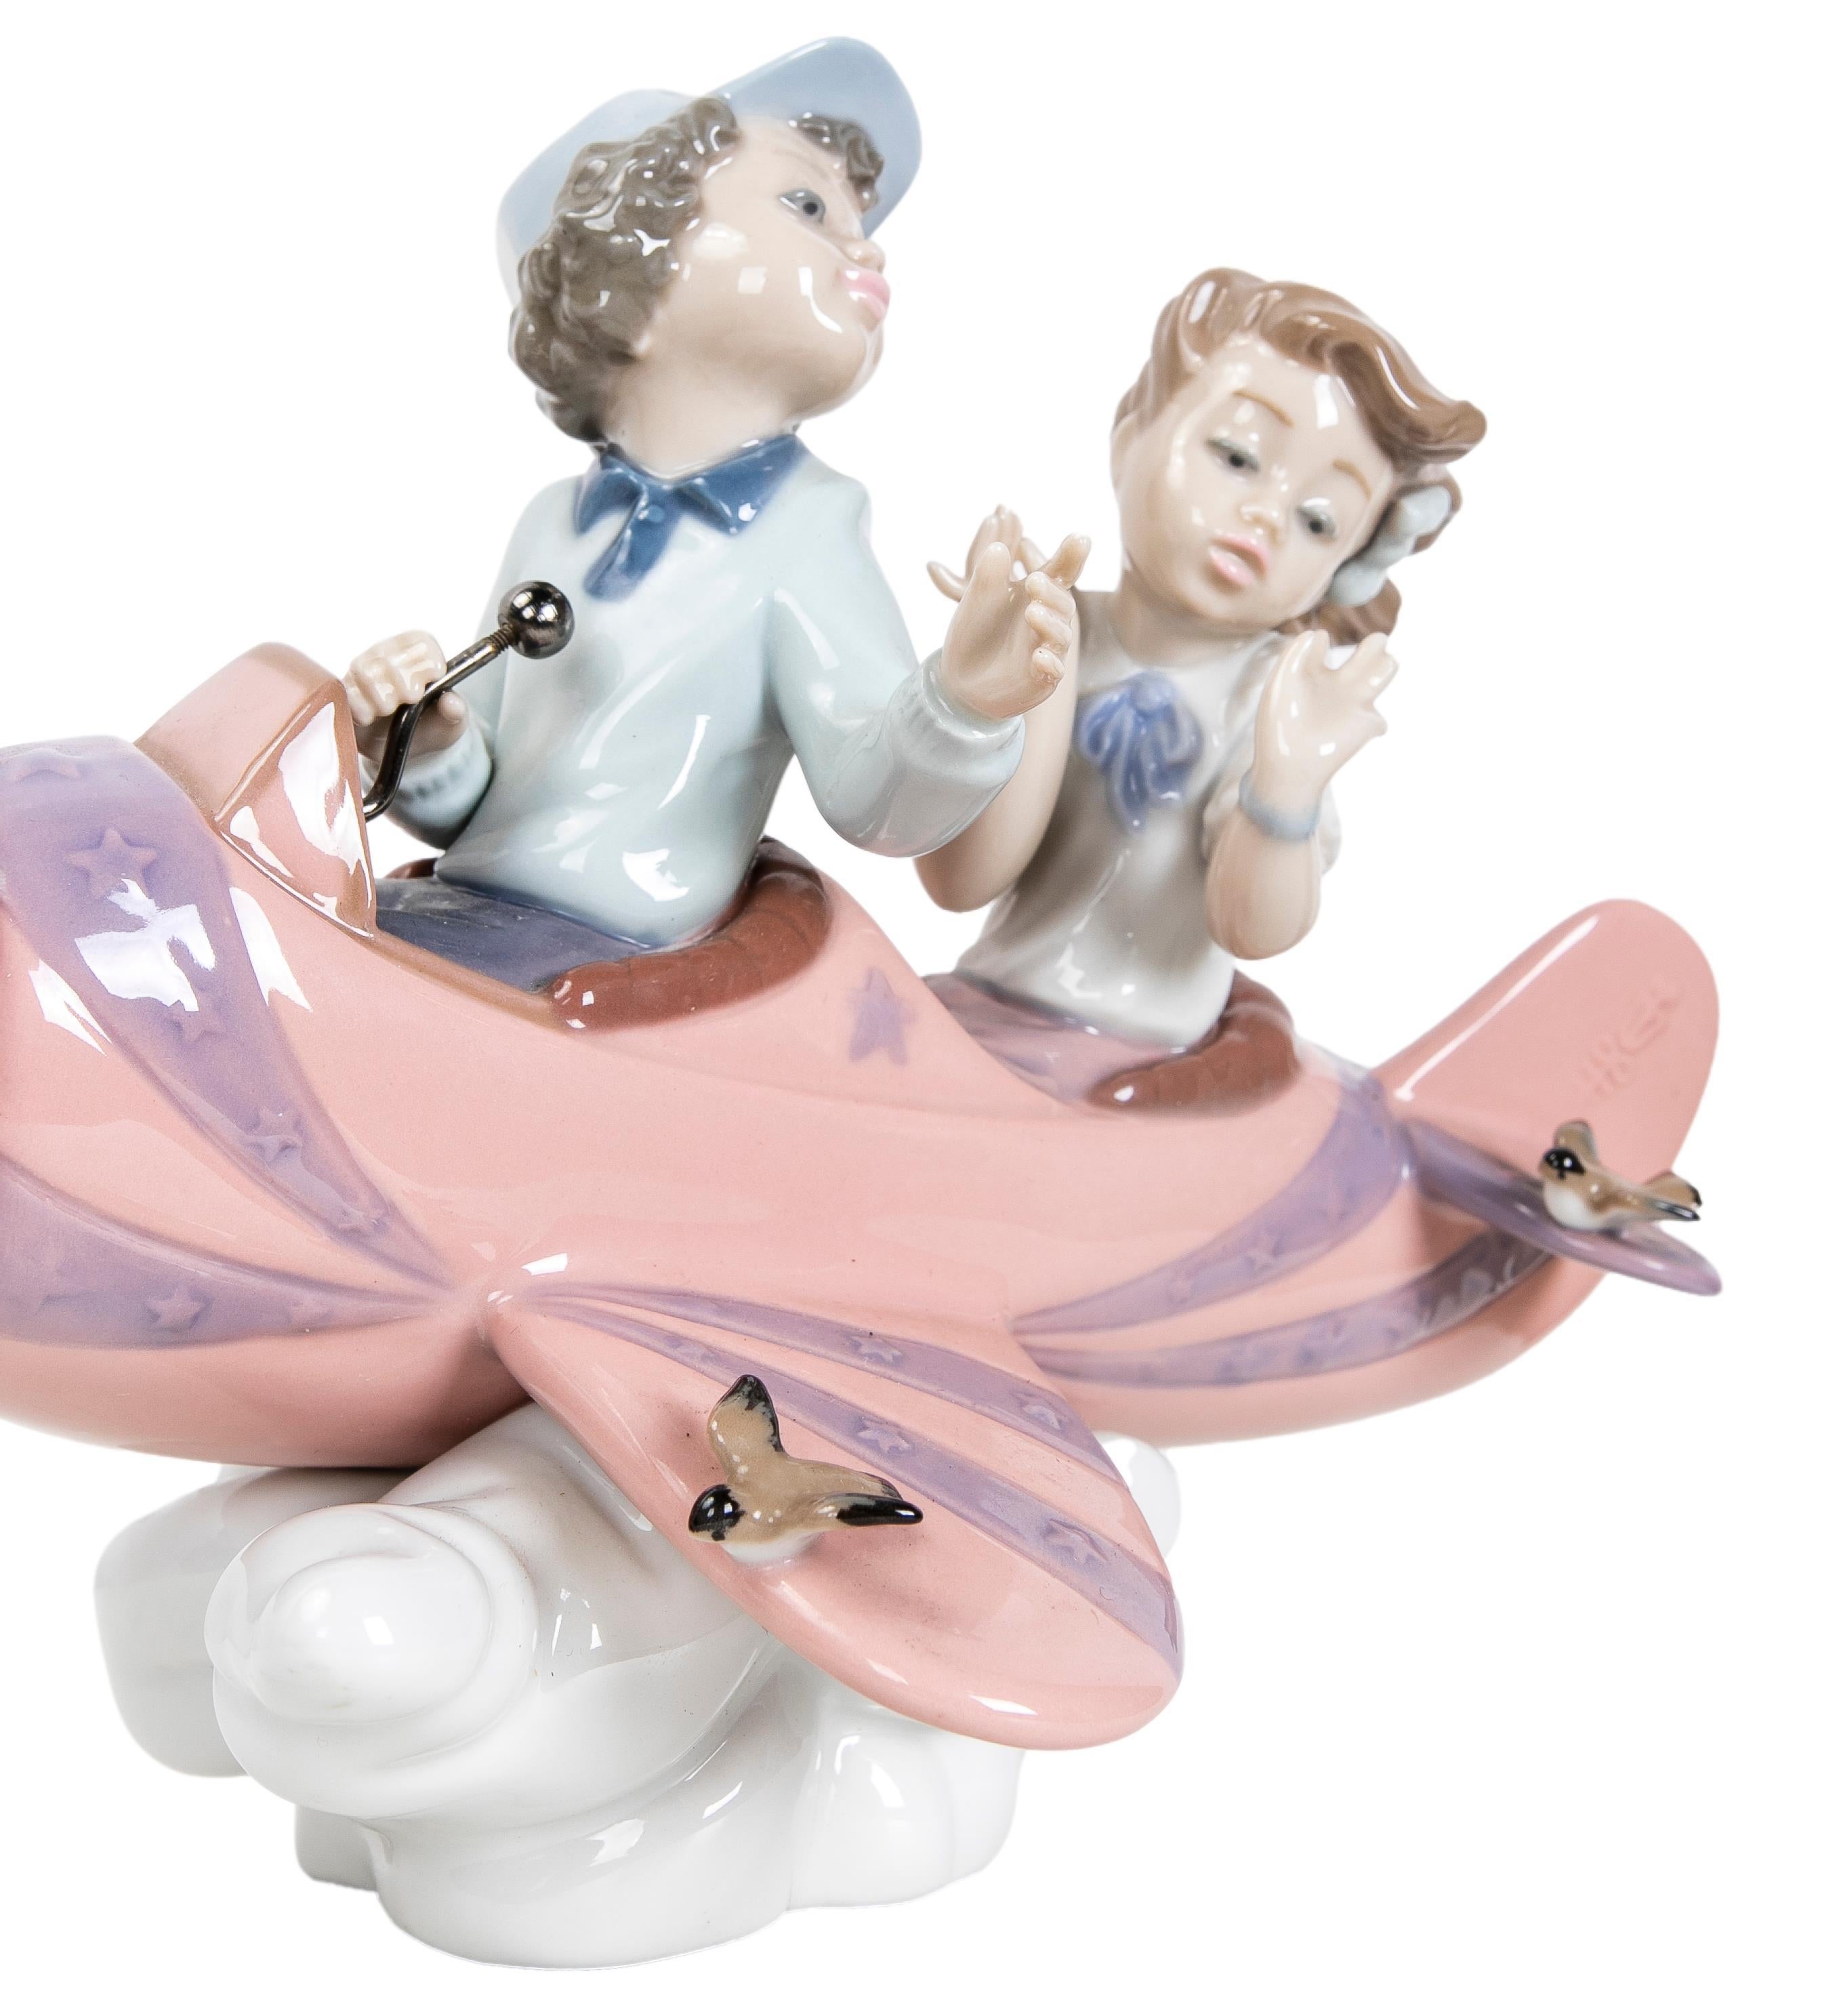 1989 Porcelain Figure of Children in Airplane Signed by the House of LLadró For Sale 2